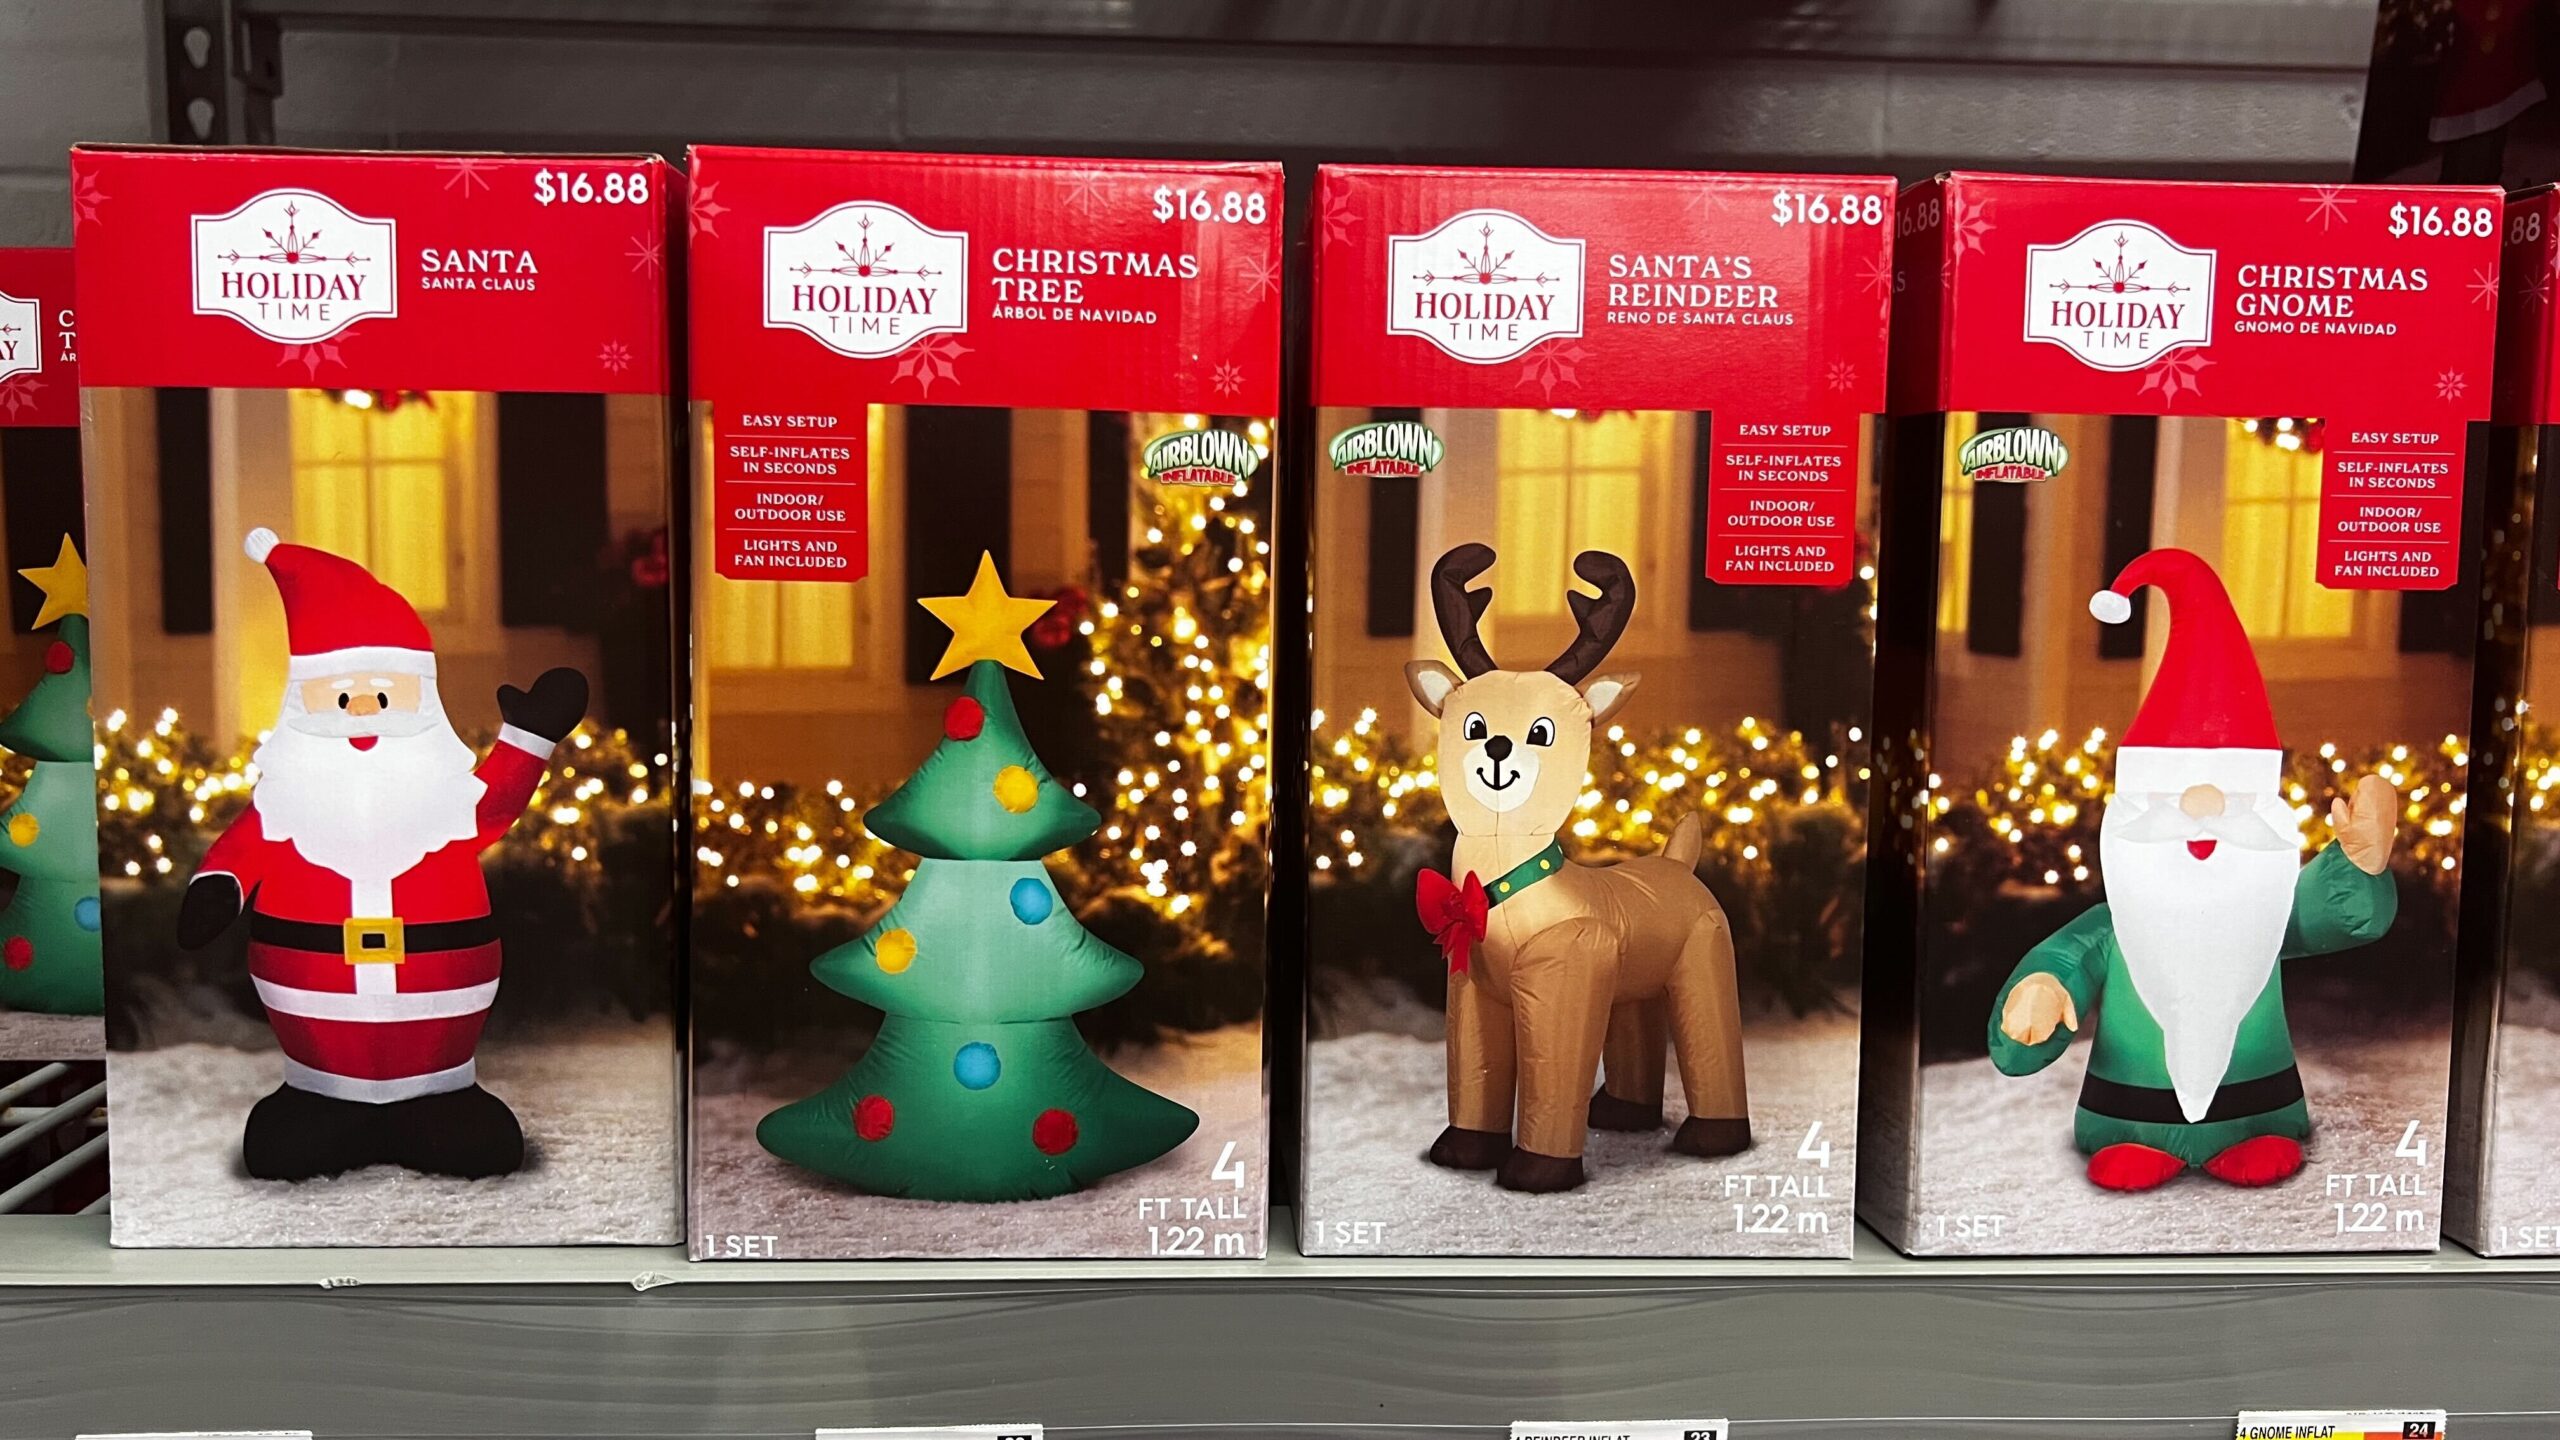 Walmart Christmas Inflatables Starting At Just 16.88 The Freebie